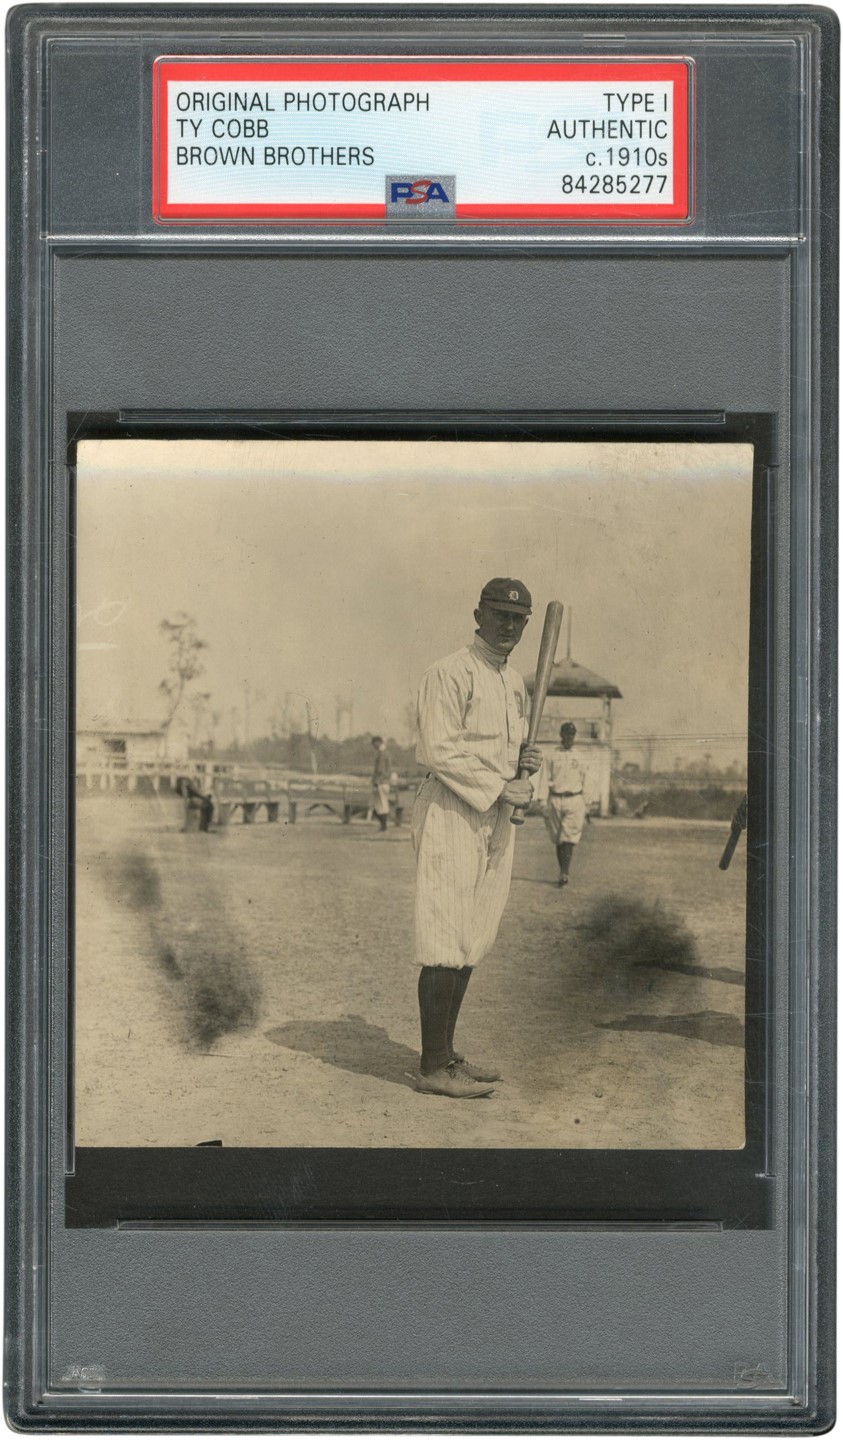 The Brown Brothers Collection - Ty Cobb Posed with Bat Photograph (PSA Type I)